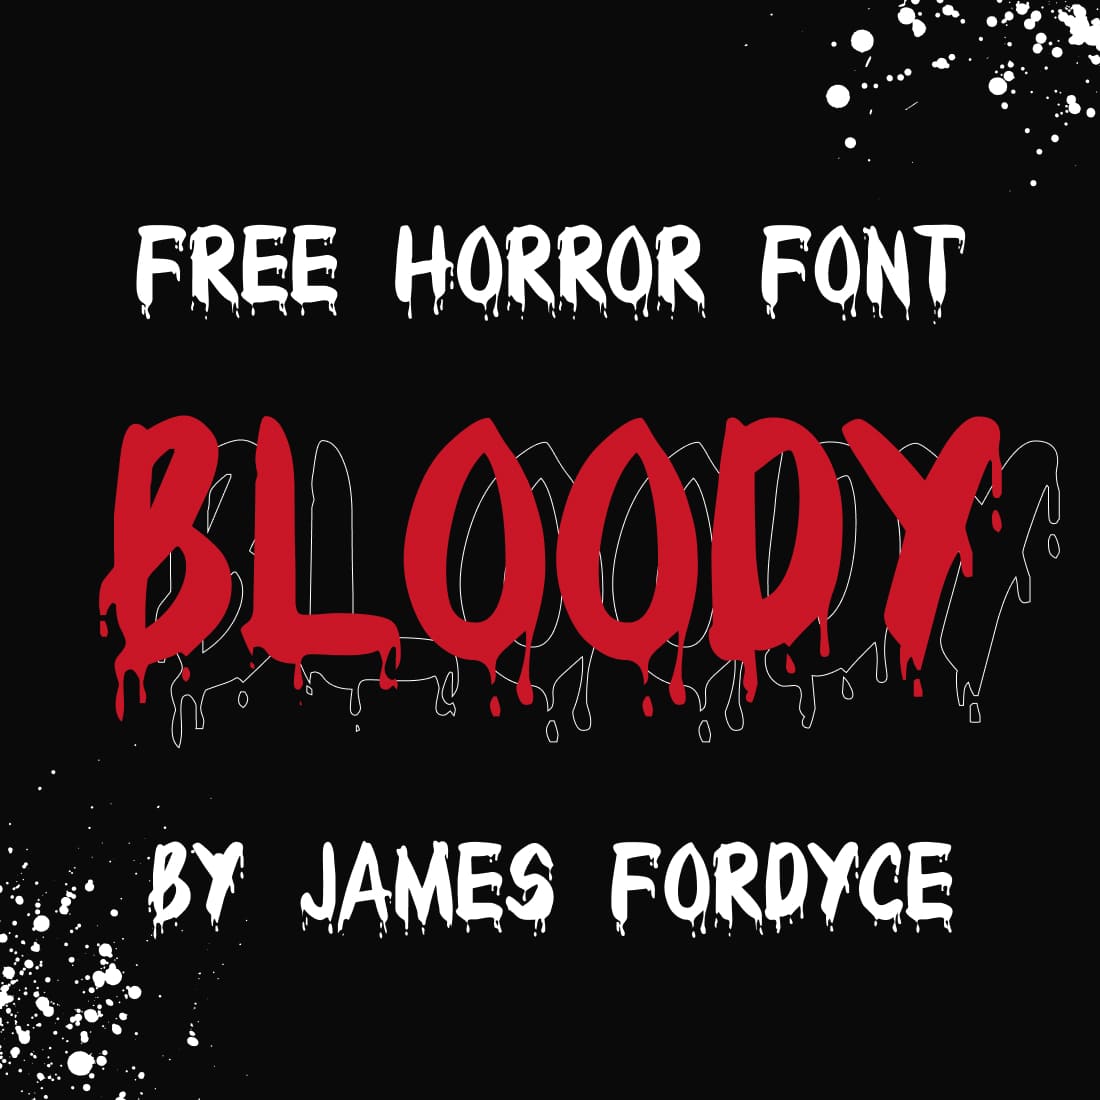 Horror font which is perfect for Halloween.